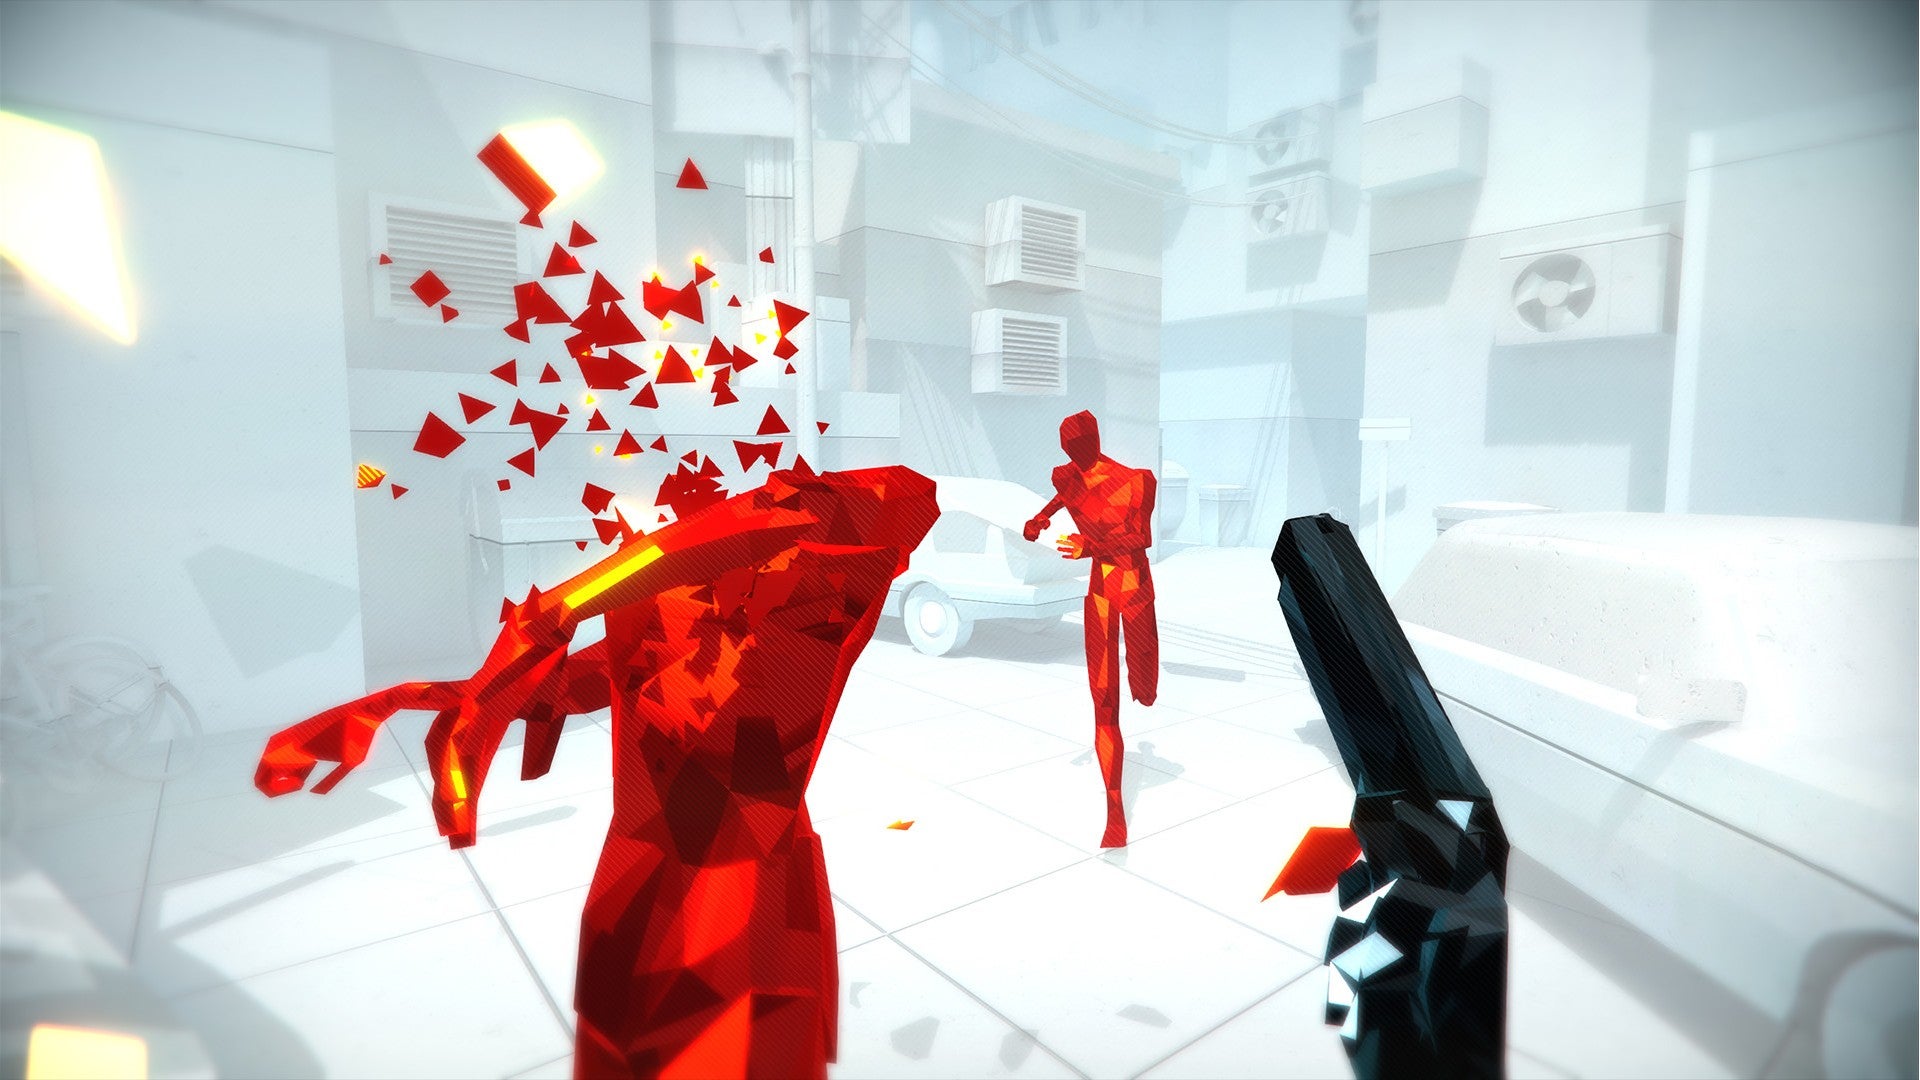 Player headshots an enemy with their pistol as another runs towards them in a white room in Superhot.